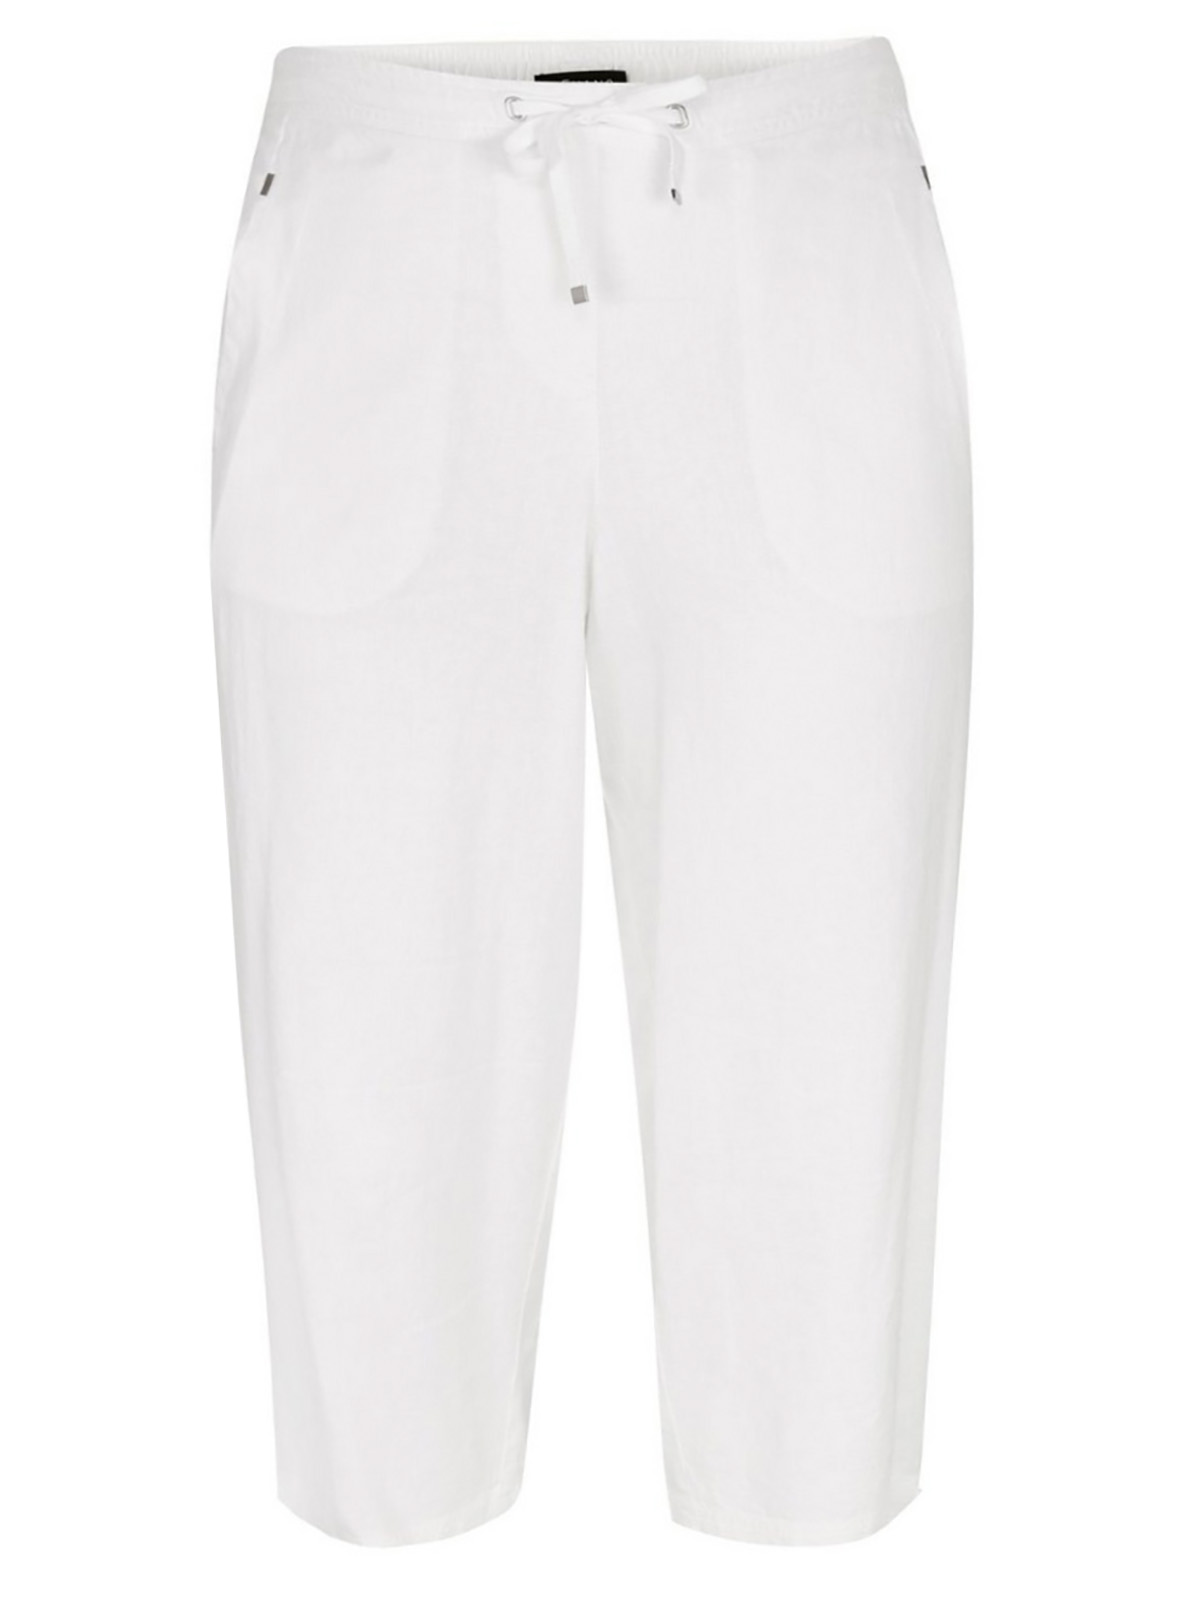 WHITE Linen Blend Pull On Cropped Trousers - Plus Size 18 to 26